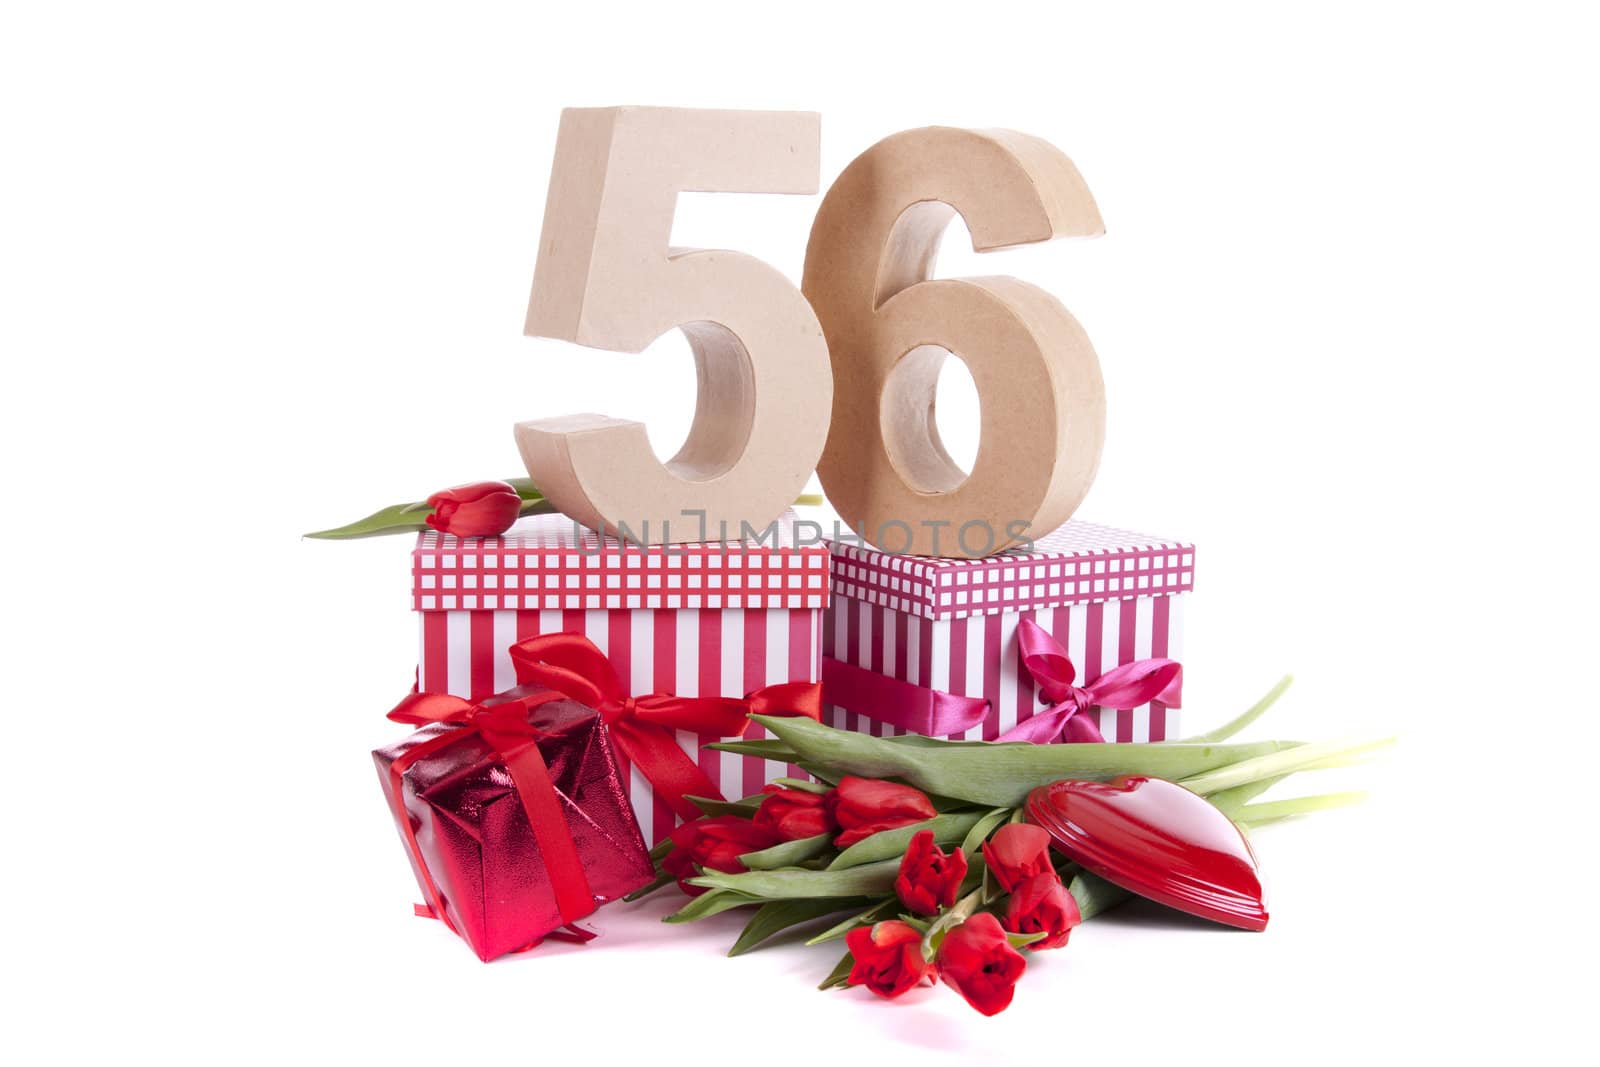 Number of age in a colorful studio setting with a red heart and gifts and tulips